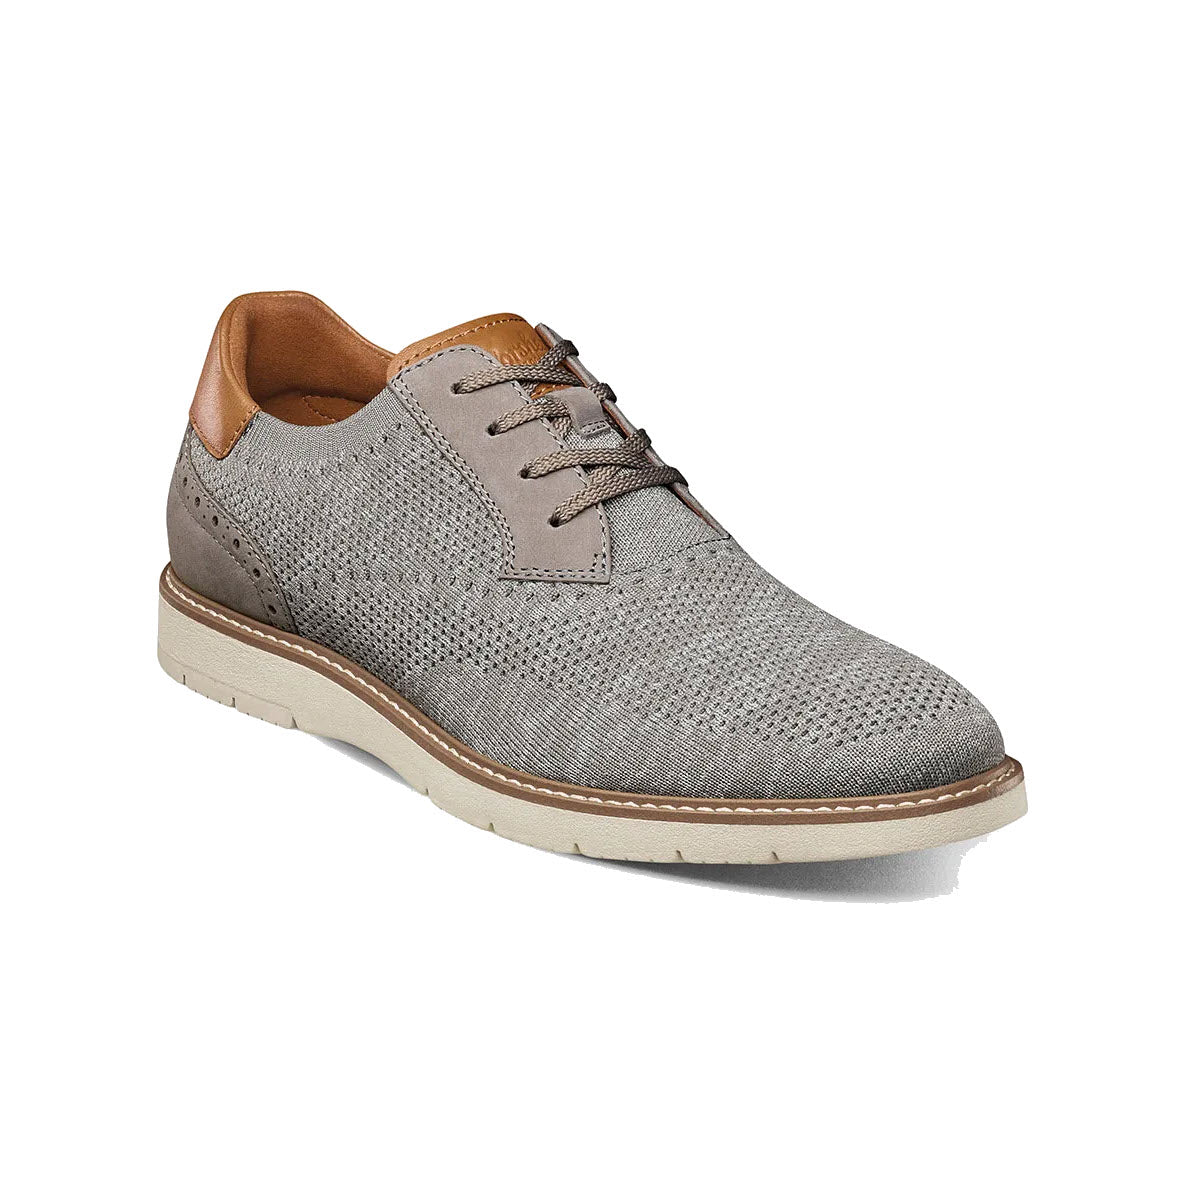 A single Florsheim Vibe Knit Plain Toe Oxford Gray men&#39;s shoe with perforated upper, tan leather accents, and a contrasting white sole.